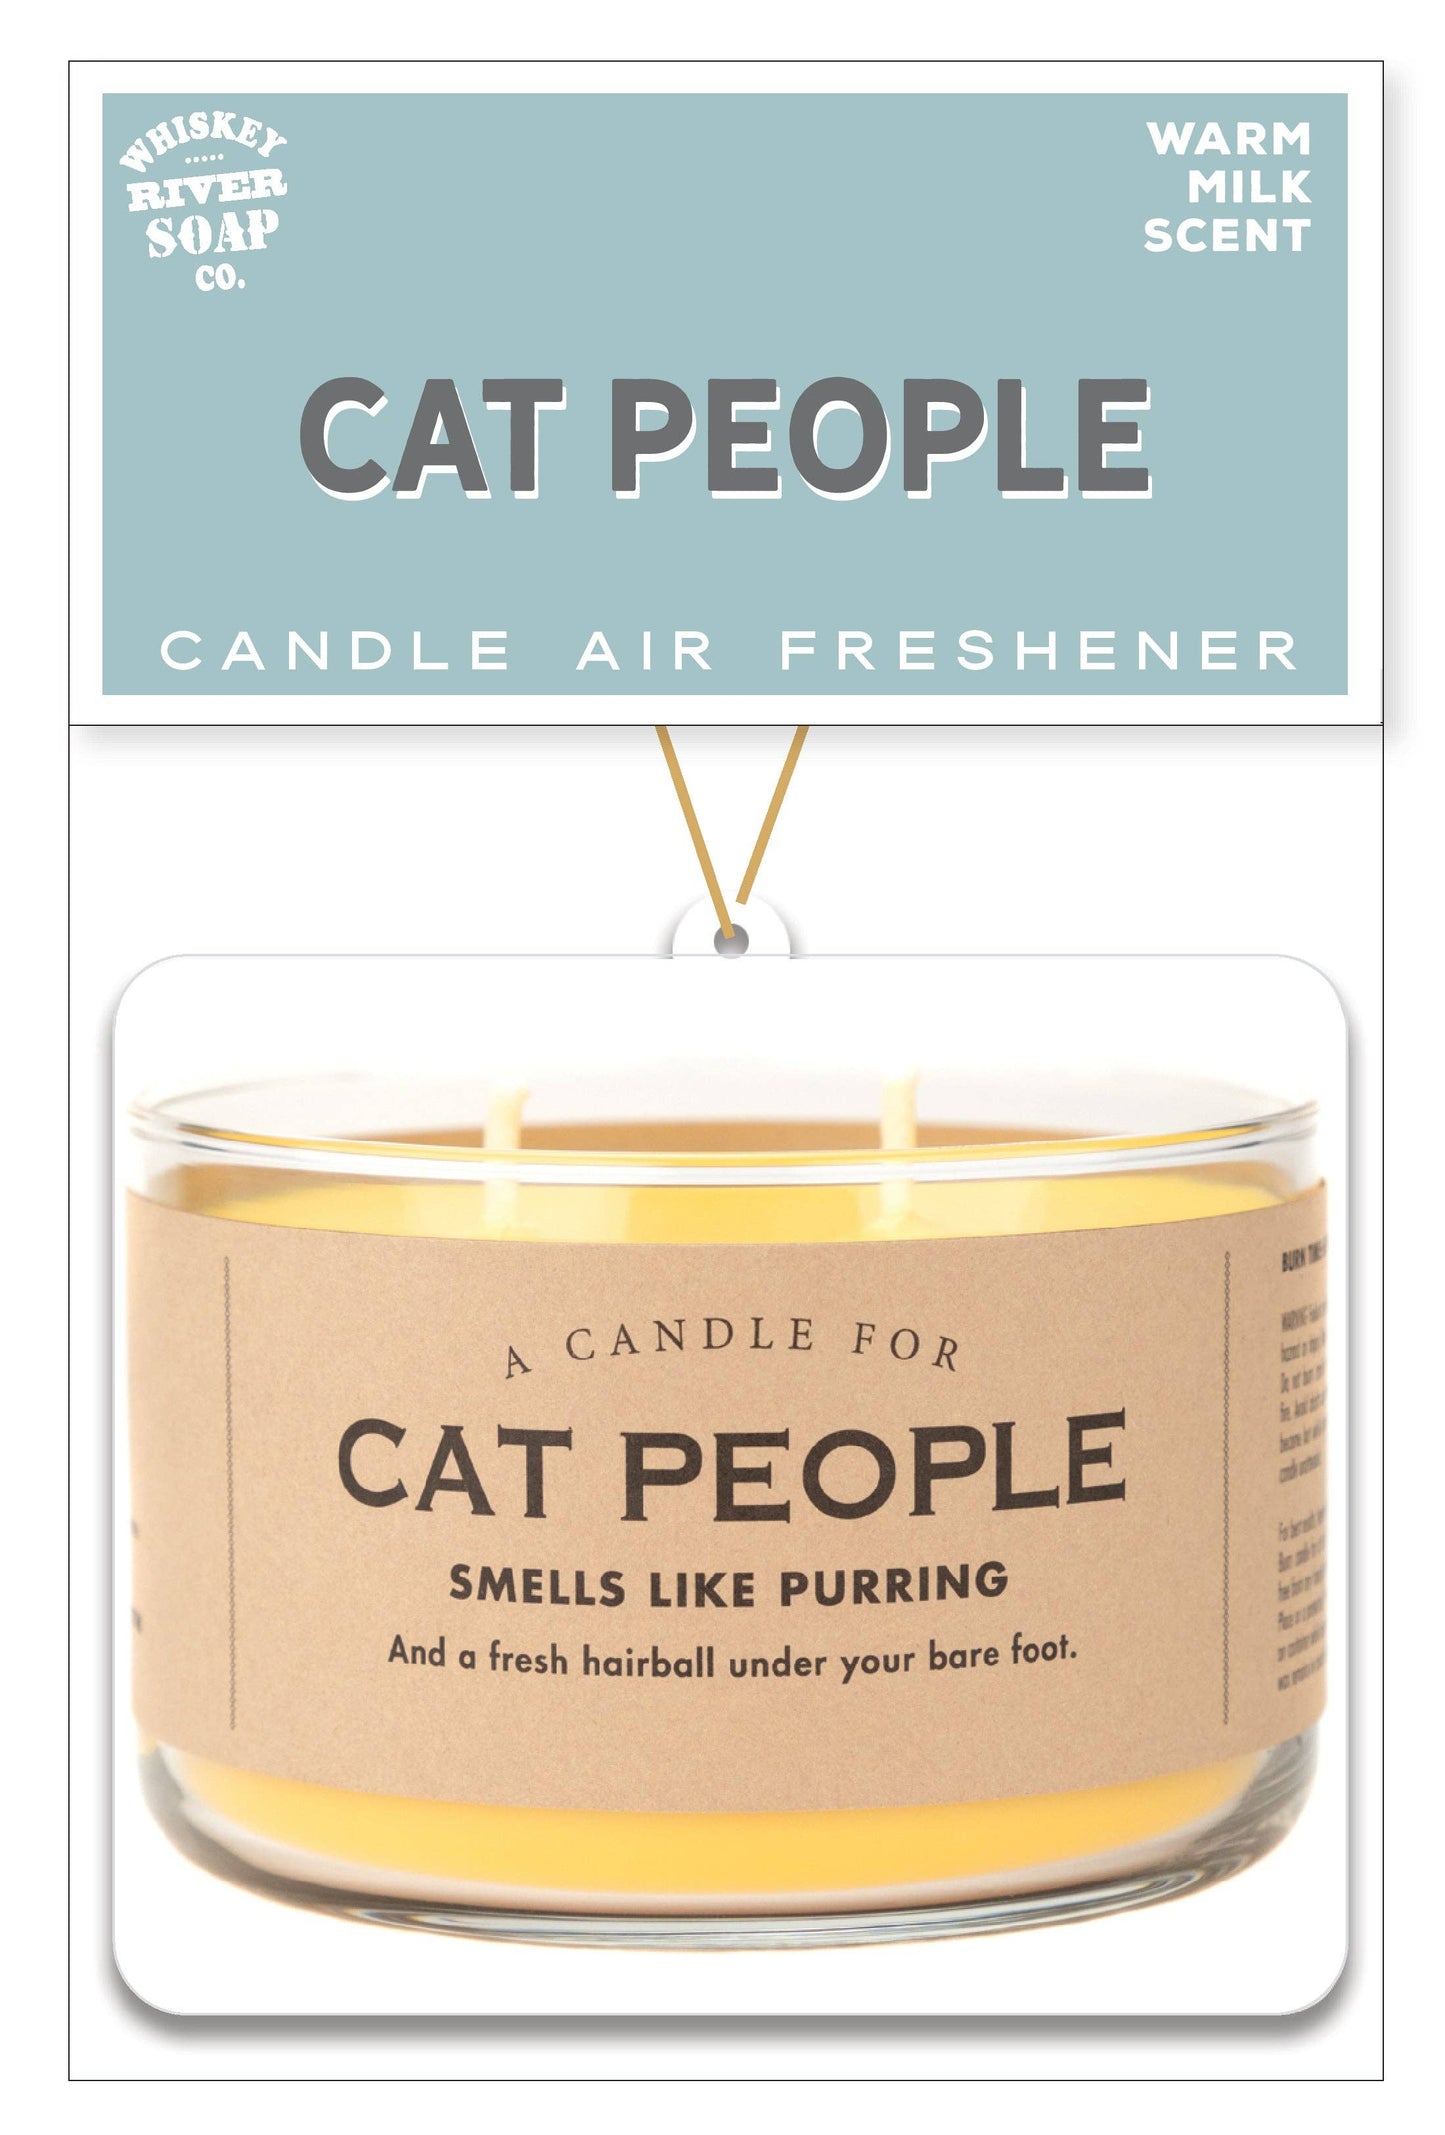 Whiskey River Soap Co Cat People Air Freshener | Funny Car Air Freshener